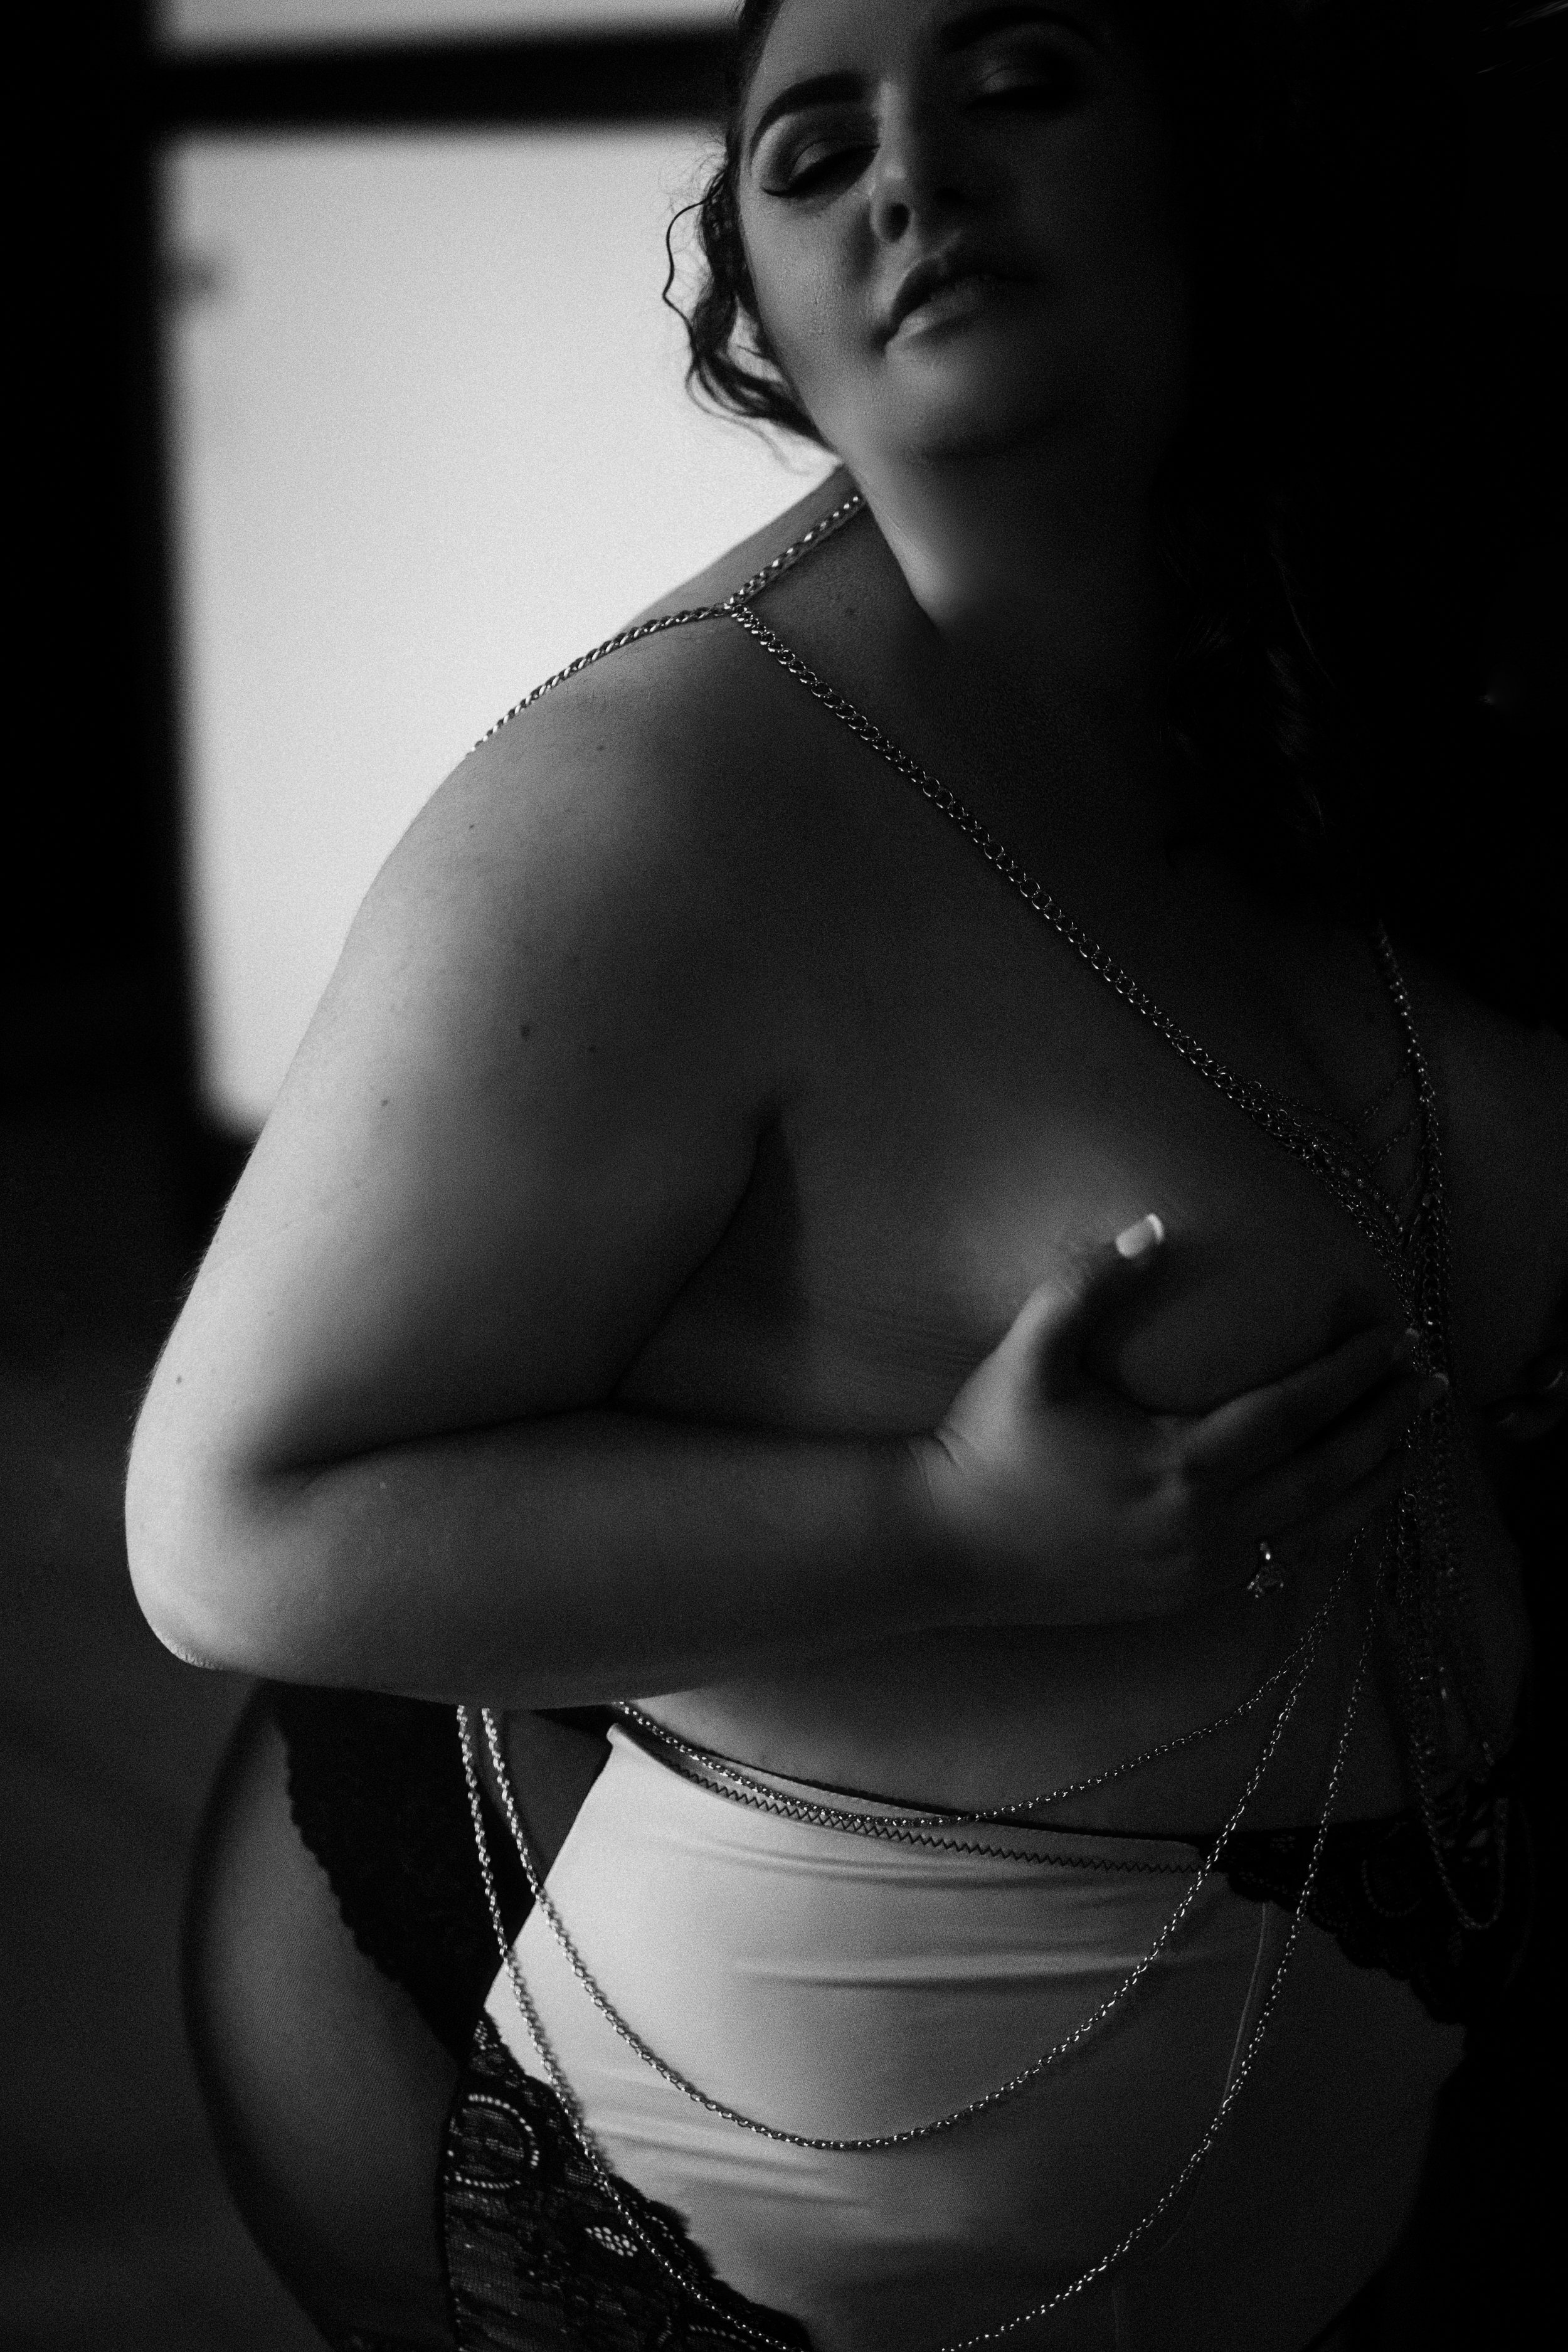 Body Chains in a black and white photo